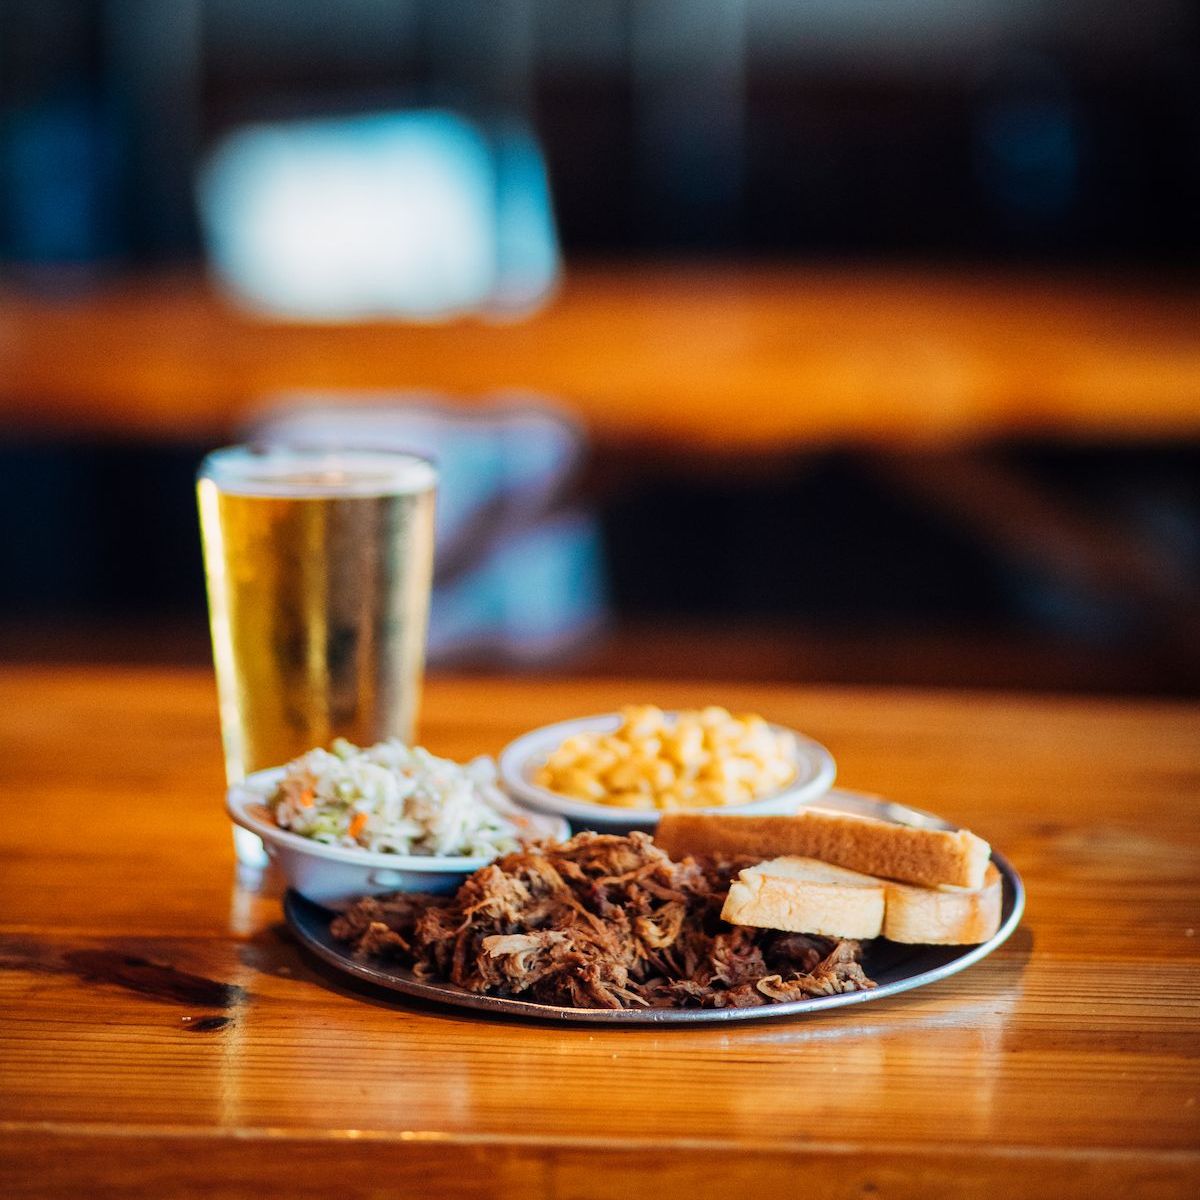 If you still have family in town, take them to Como Smoke & Fire for a Columbia-exclusive barbecue experience. #missouribbq #columbiabbq #columbiamo #comosmokeandfire #savorcolumbia